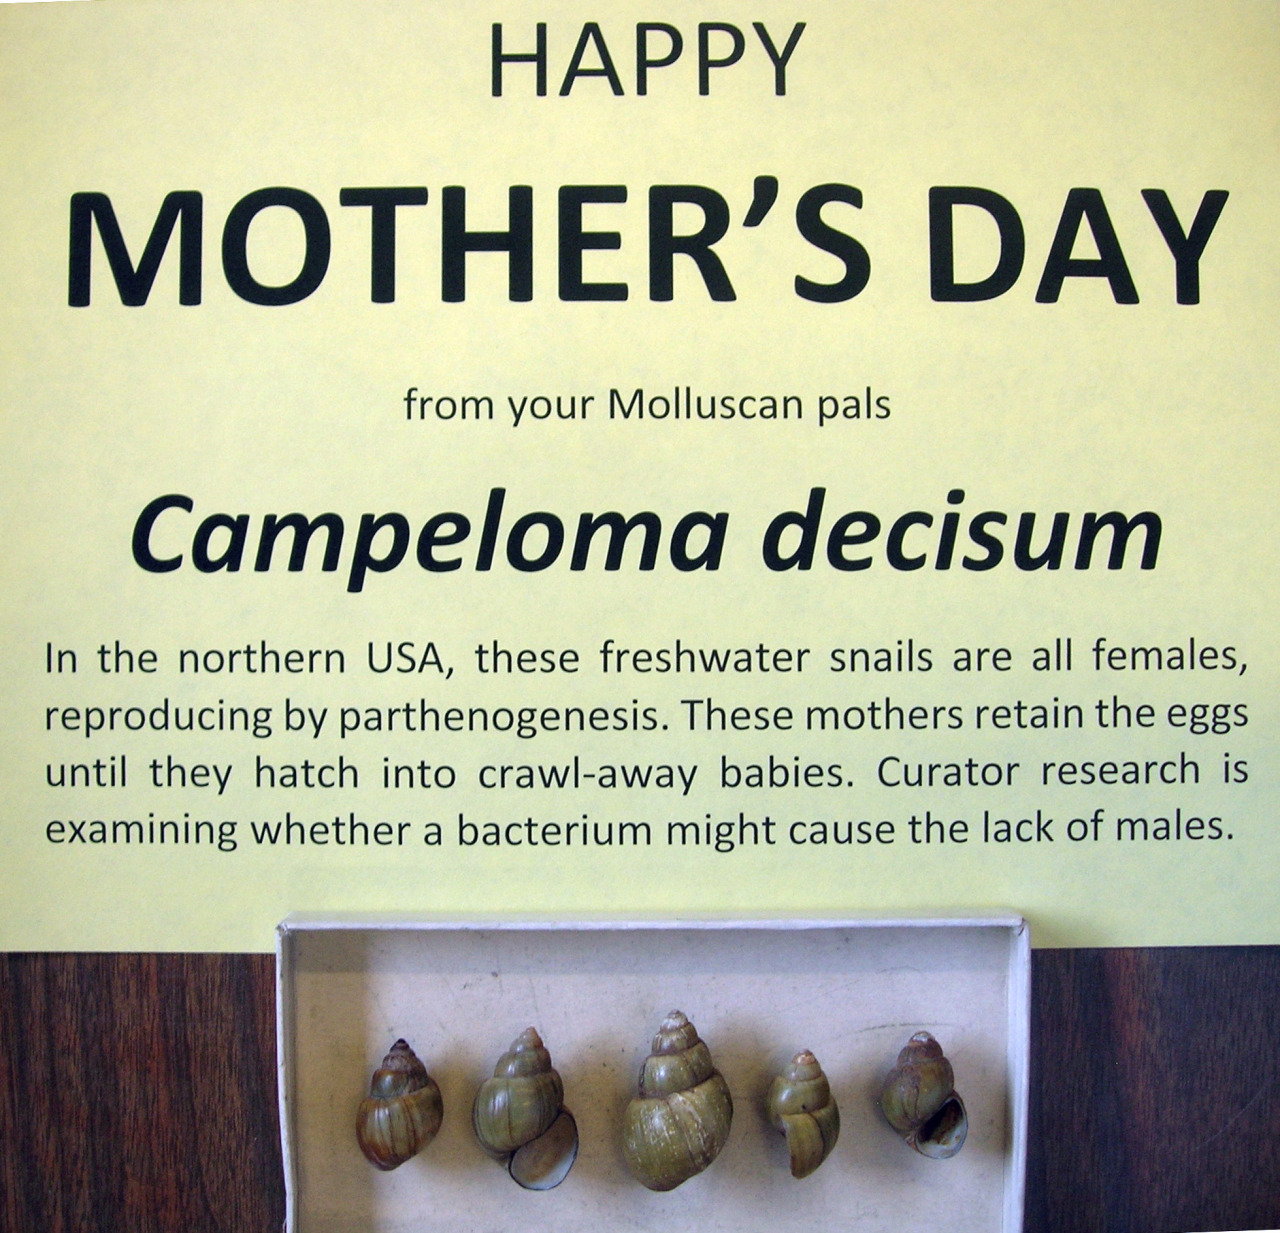 Happy Mother's Day from your Molluscan pals